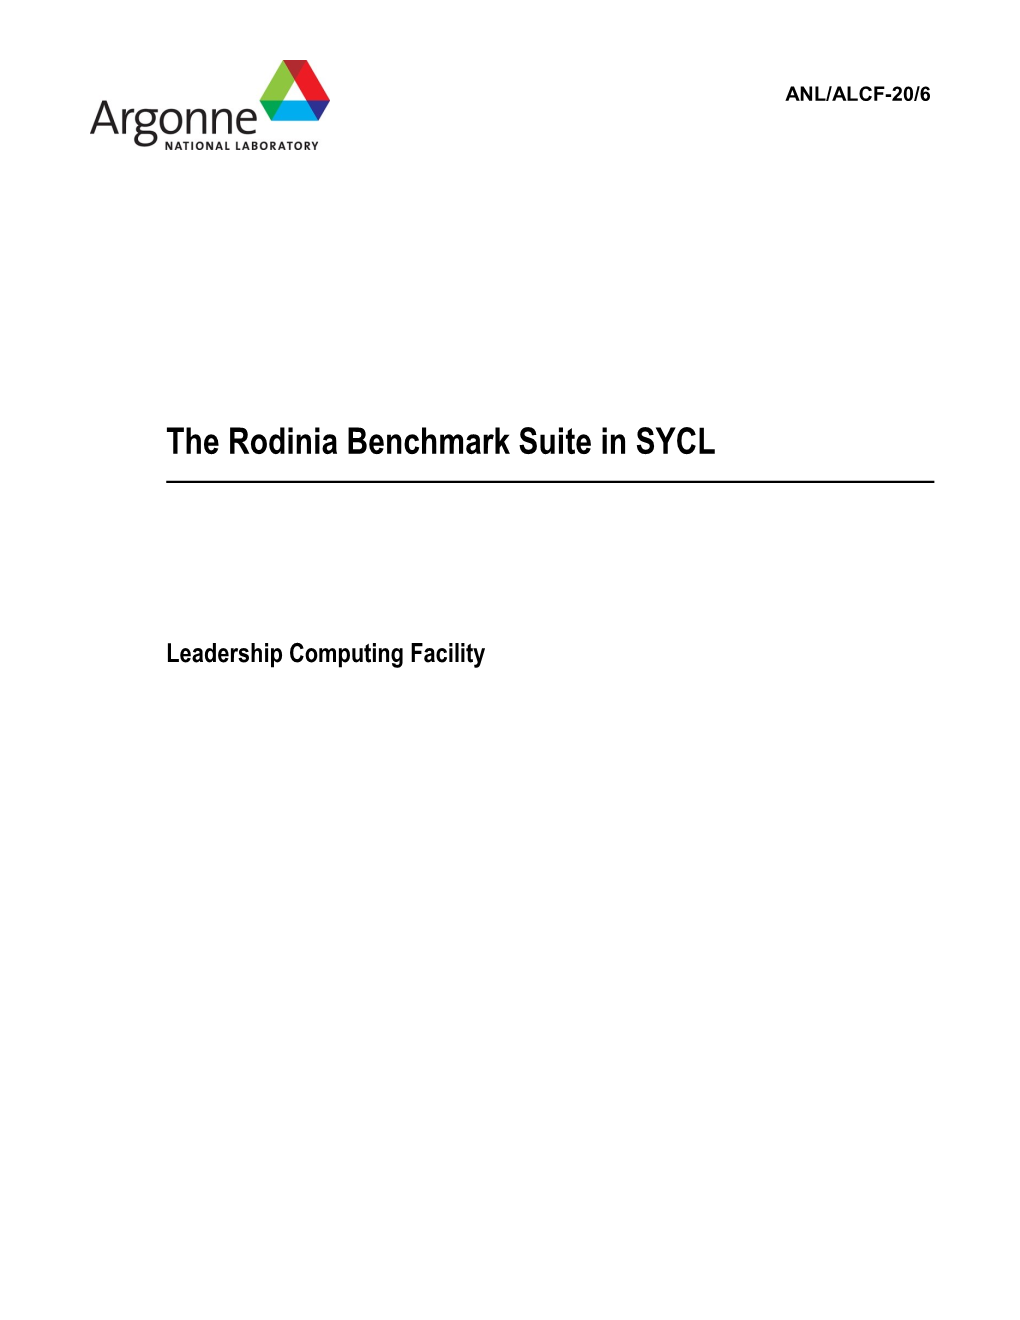 The Rodinia Benchmark Suite in SYCL